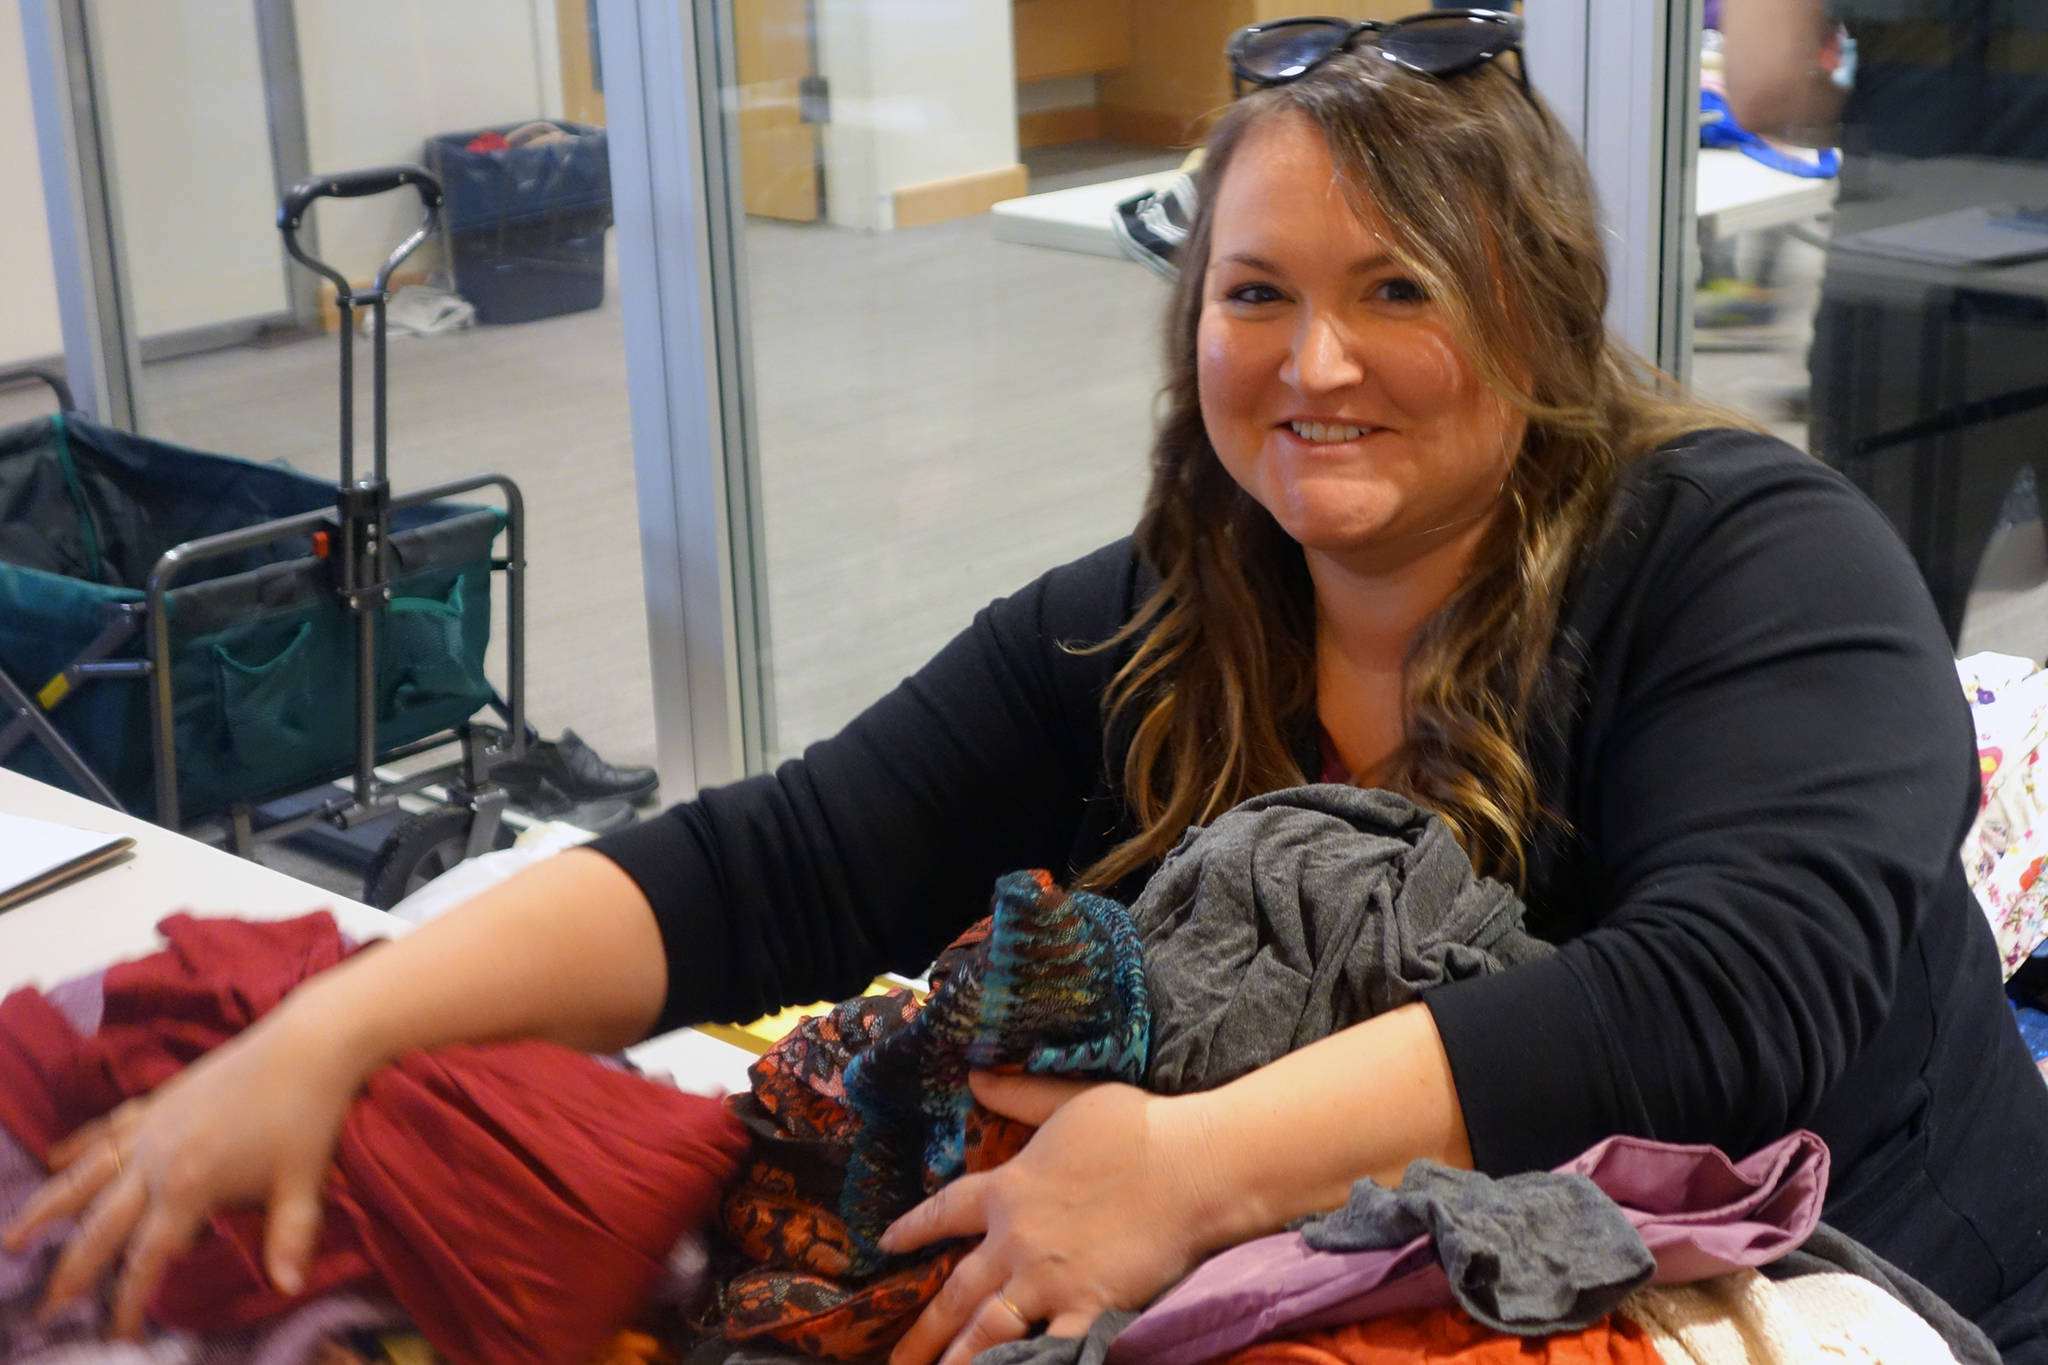 Swap co-organizer Miranda McCarty moves a pile of clothing to be processed by volunteers at the community clothing swap Saturday, Nov. 9. (Ben Hohenstatt | Juneau Empire)